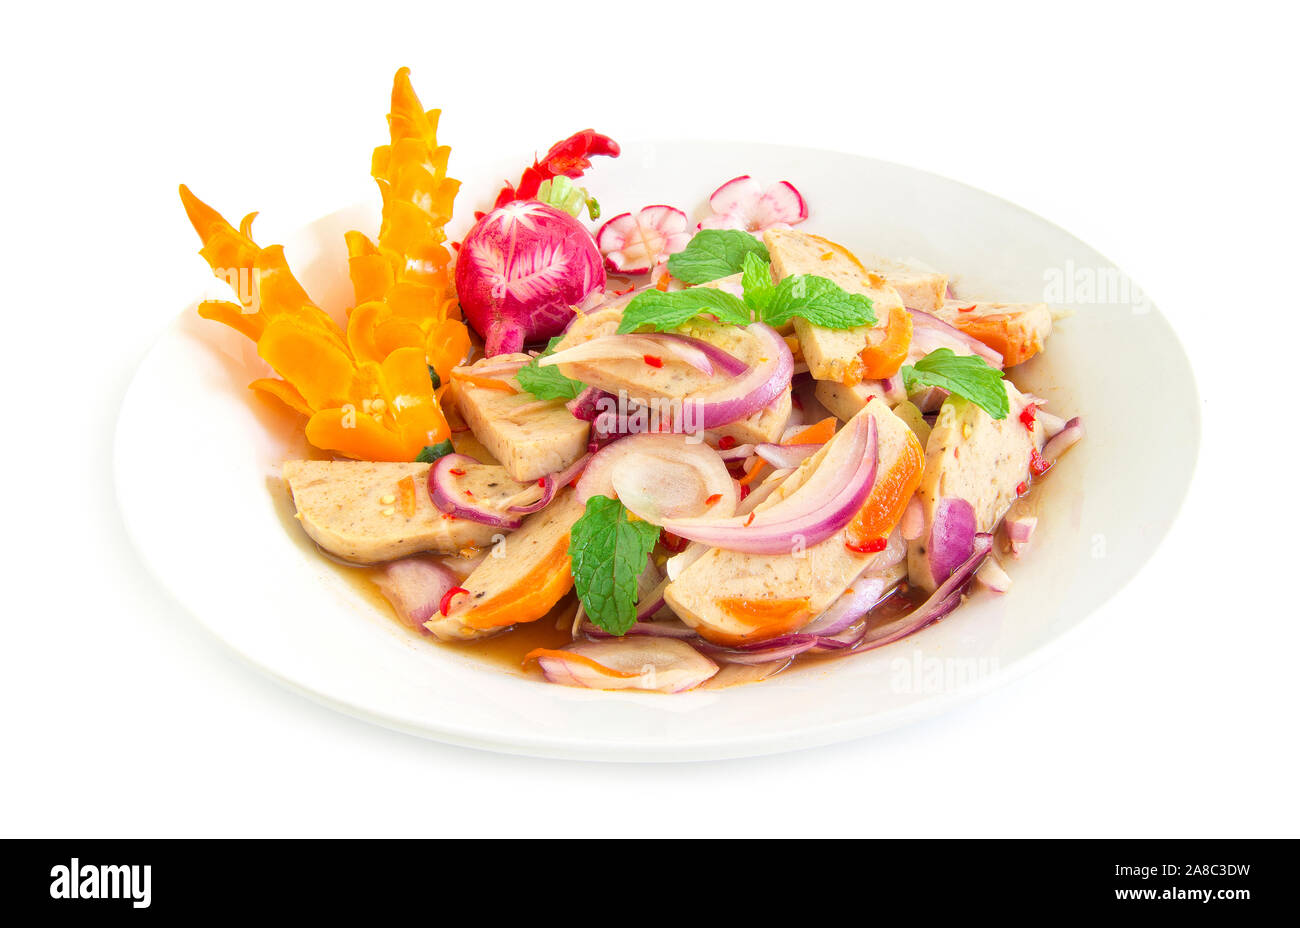 Spicy salad fermented pork sausage with salt egg yolk. Thai food on dish decorate with chili carved  side view Isolated on white background Stock Photo